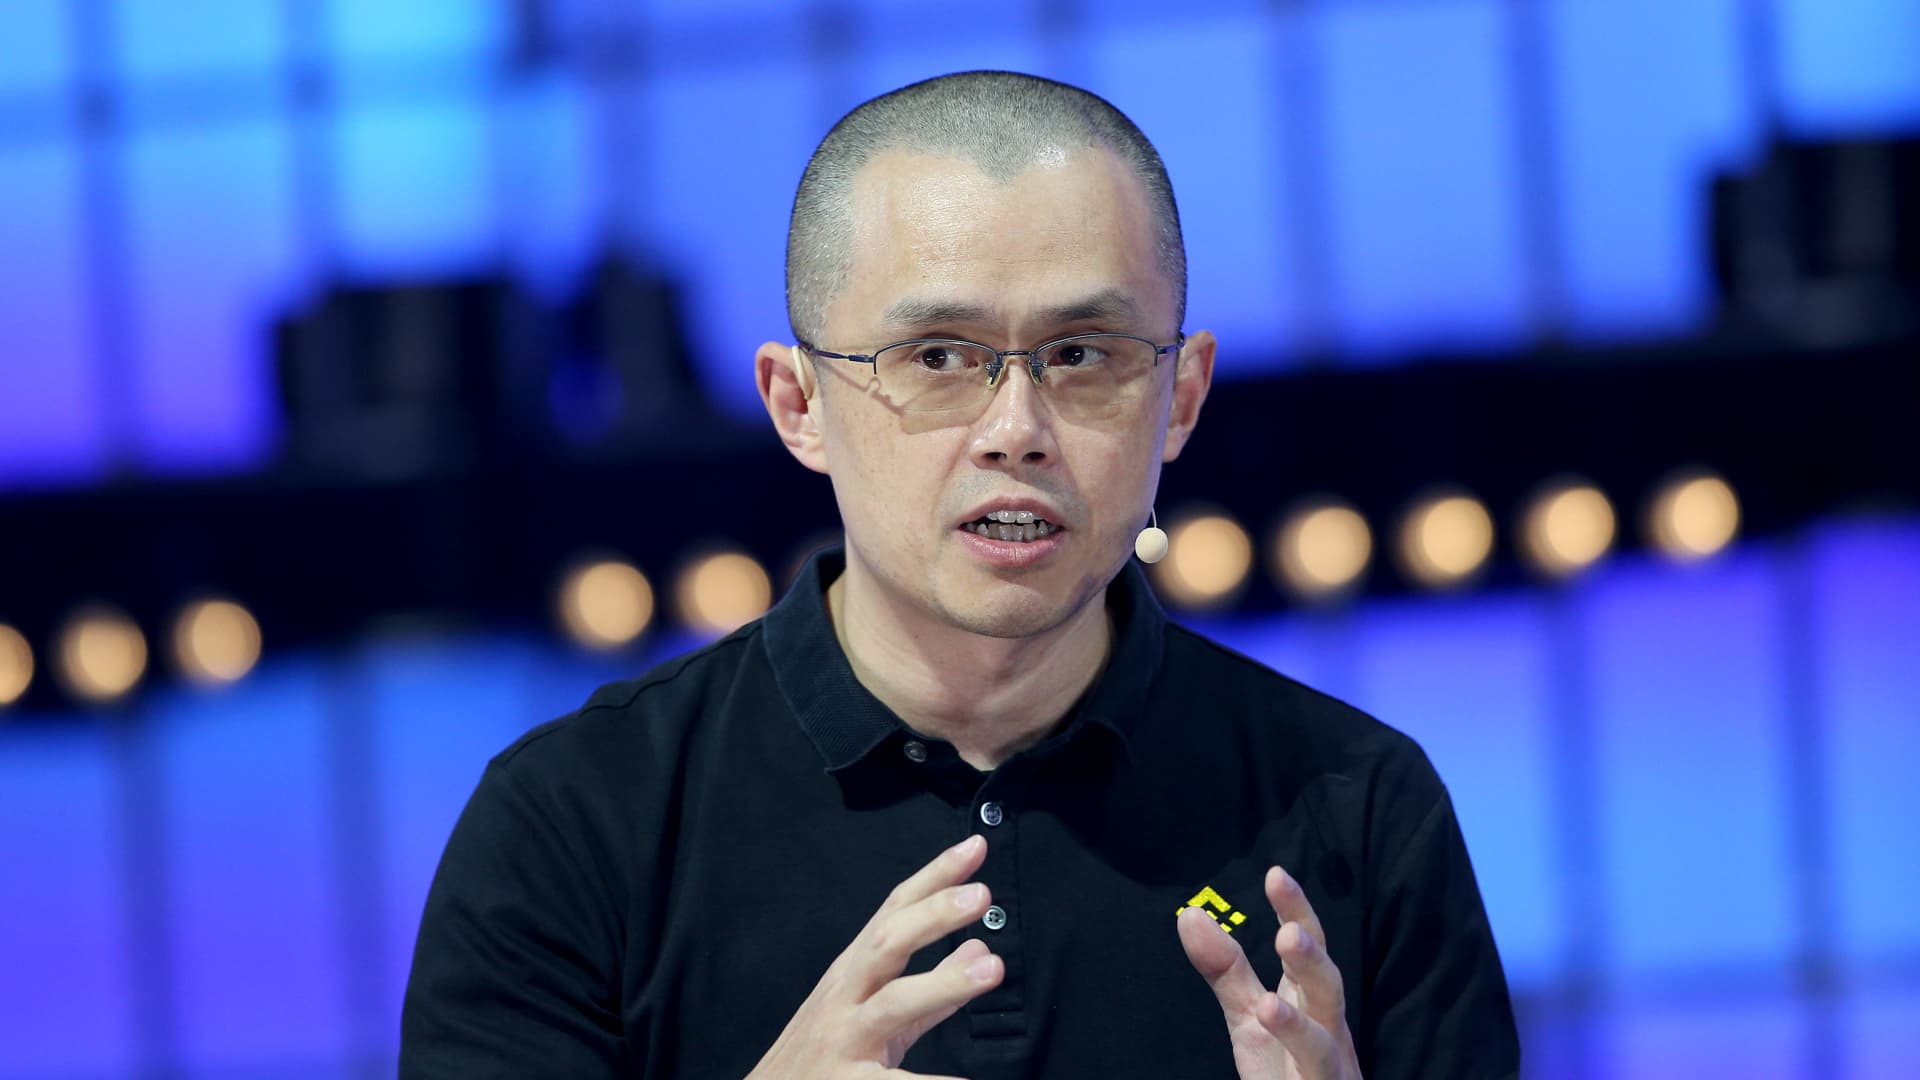 $2.2 billion of Binance customer assets at significant risk, SEC says